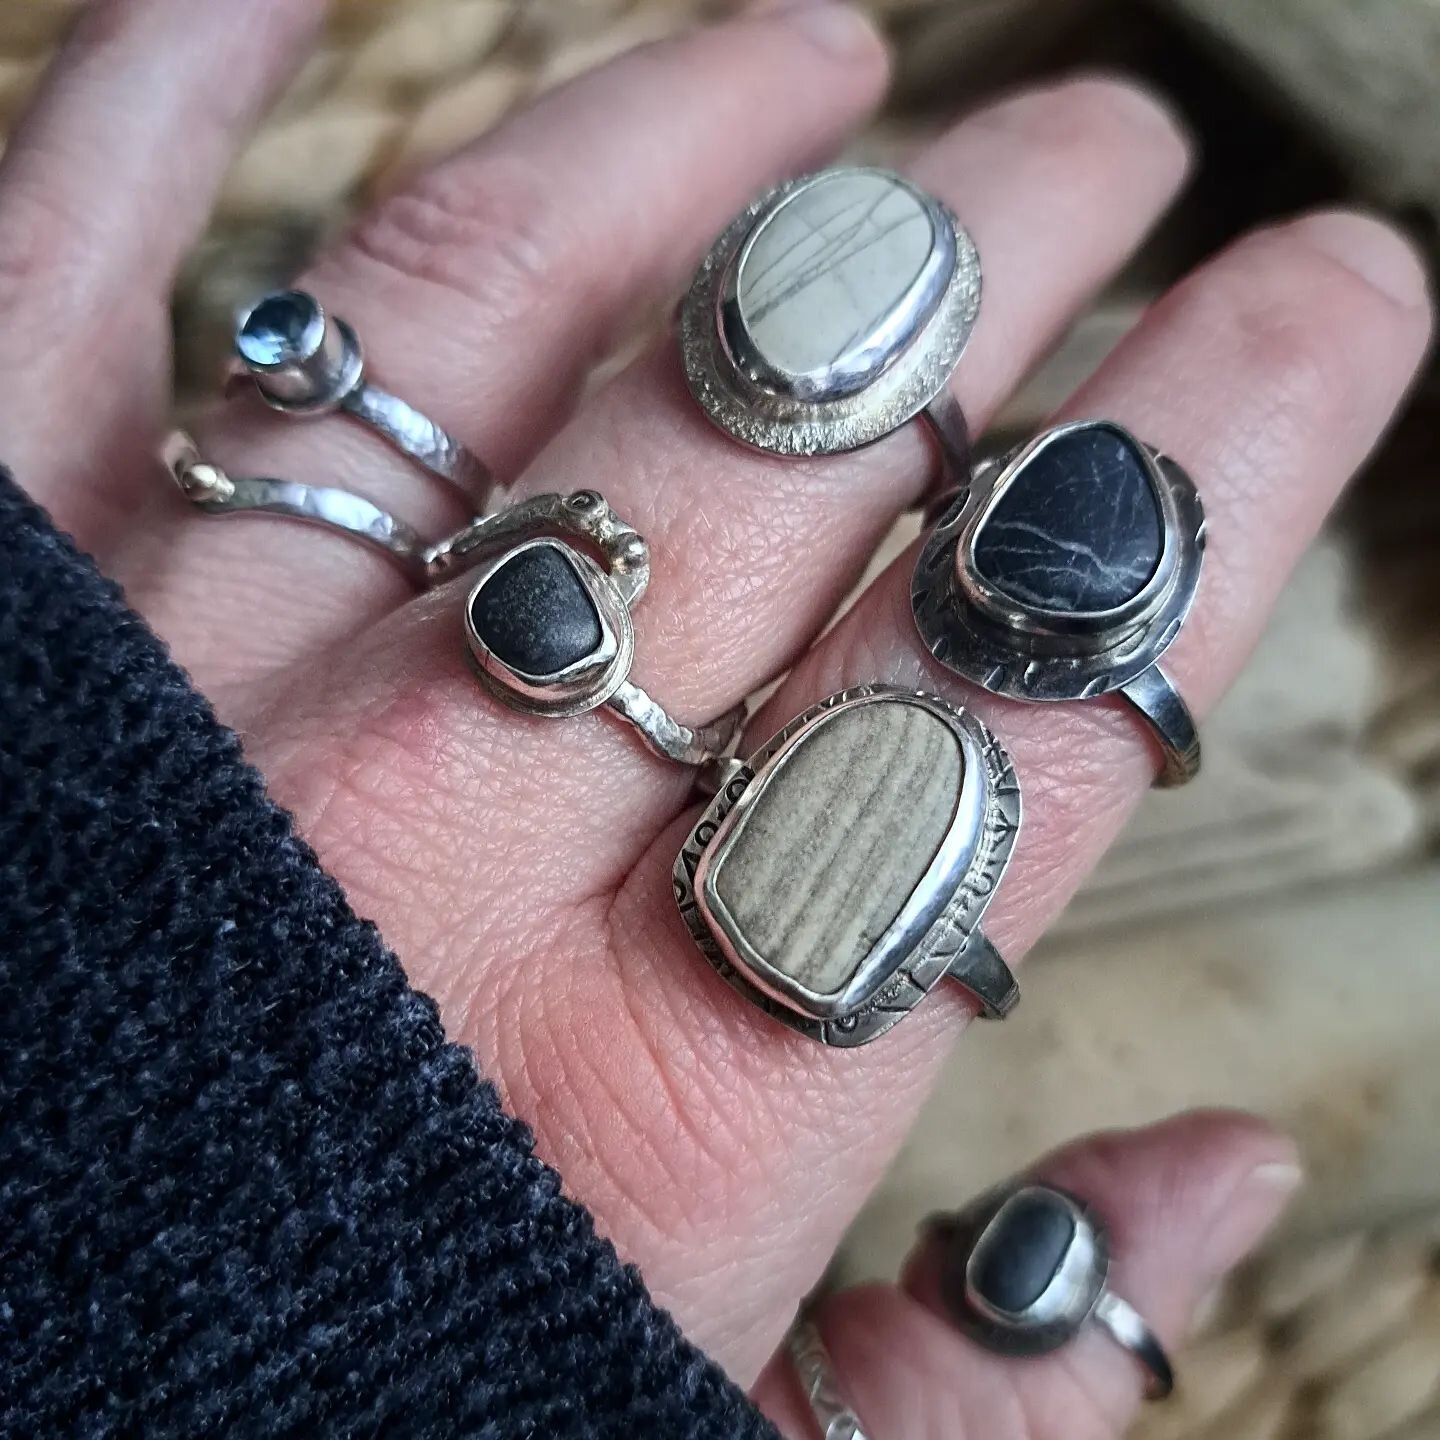 The beauty of pebbles in mono. All of these are available in my shop at the moment. I think the black one on my index finger is my fave! 

https://www.ilovedollyjewellery.co.uk/rings

#pebblejewellery #beachcombingjewelry #beachcombingtreasures #pebb